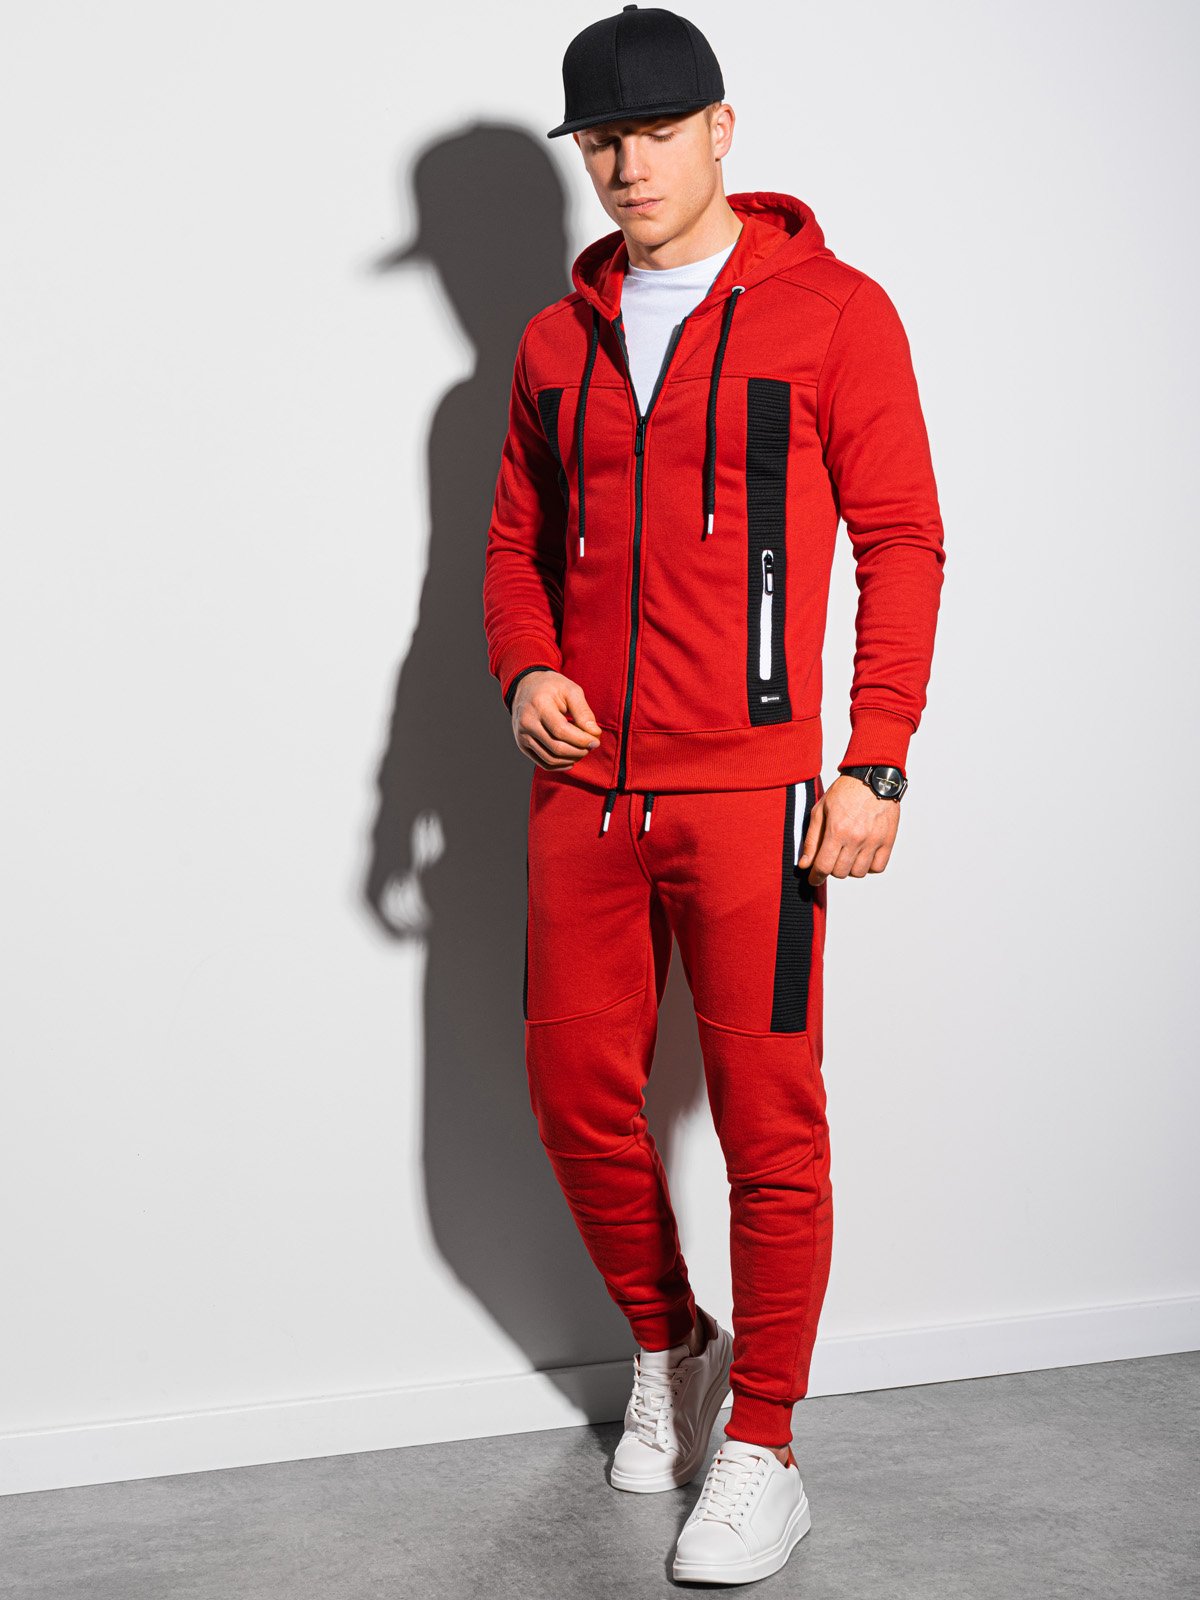 The Red Rockets | Men's Red Suit Pants